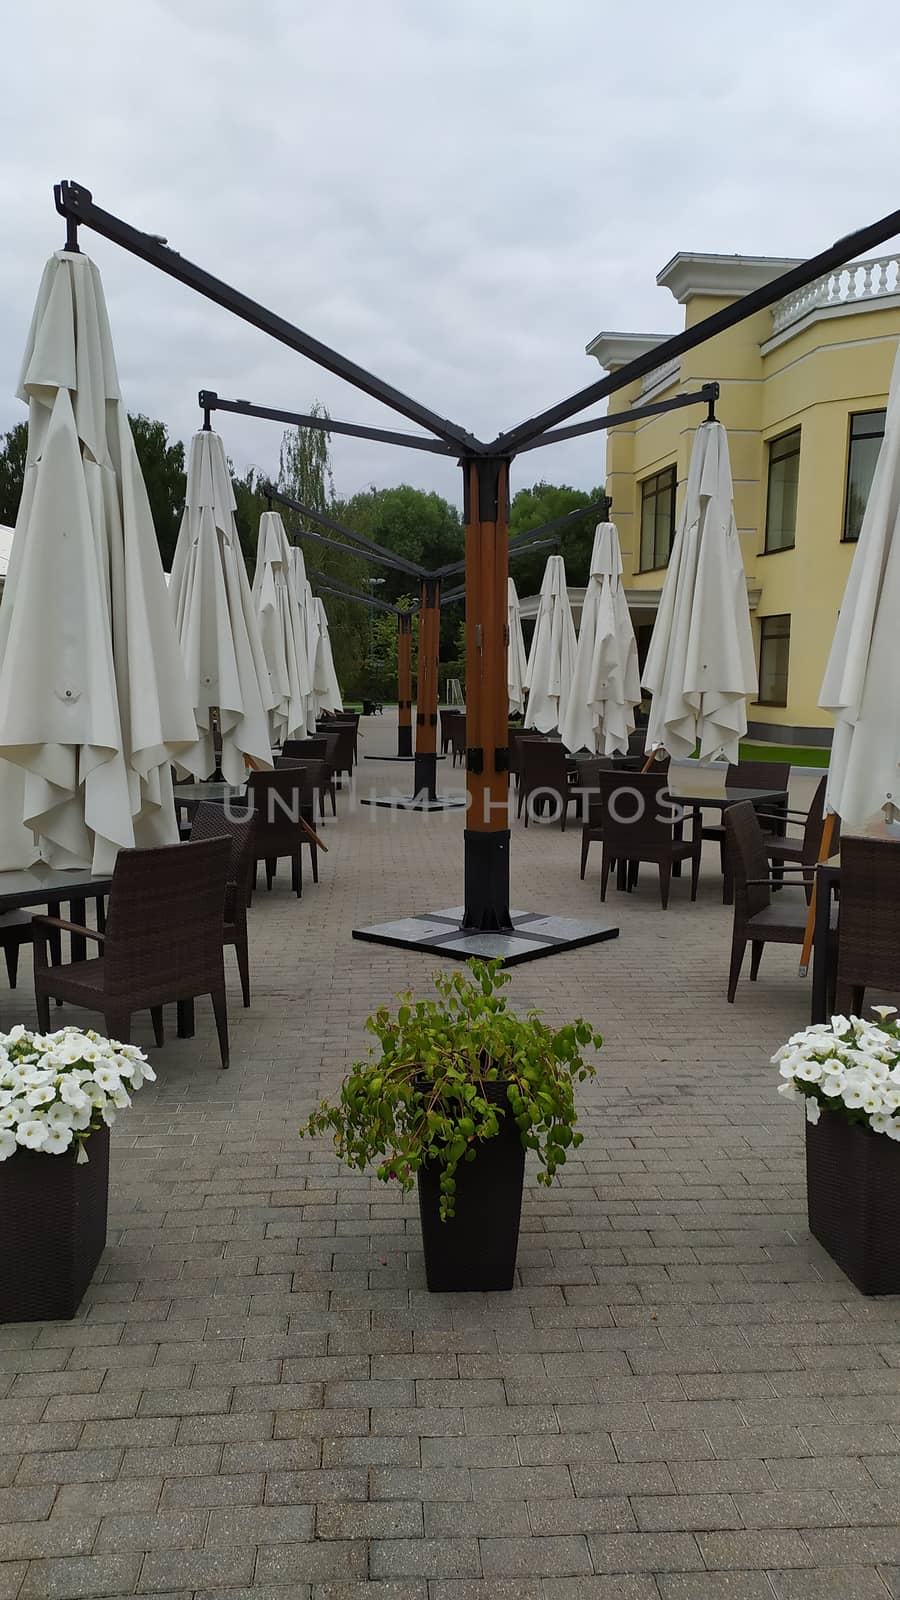 outdoor cafe prepared for the rain. Removed the chairs, rolled up the canopy